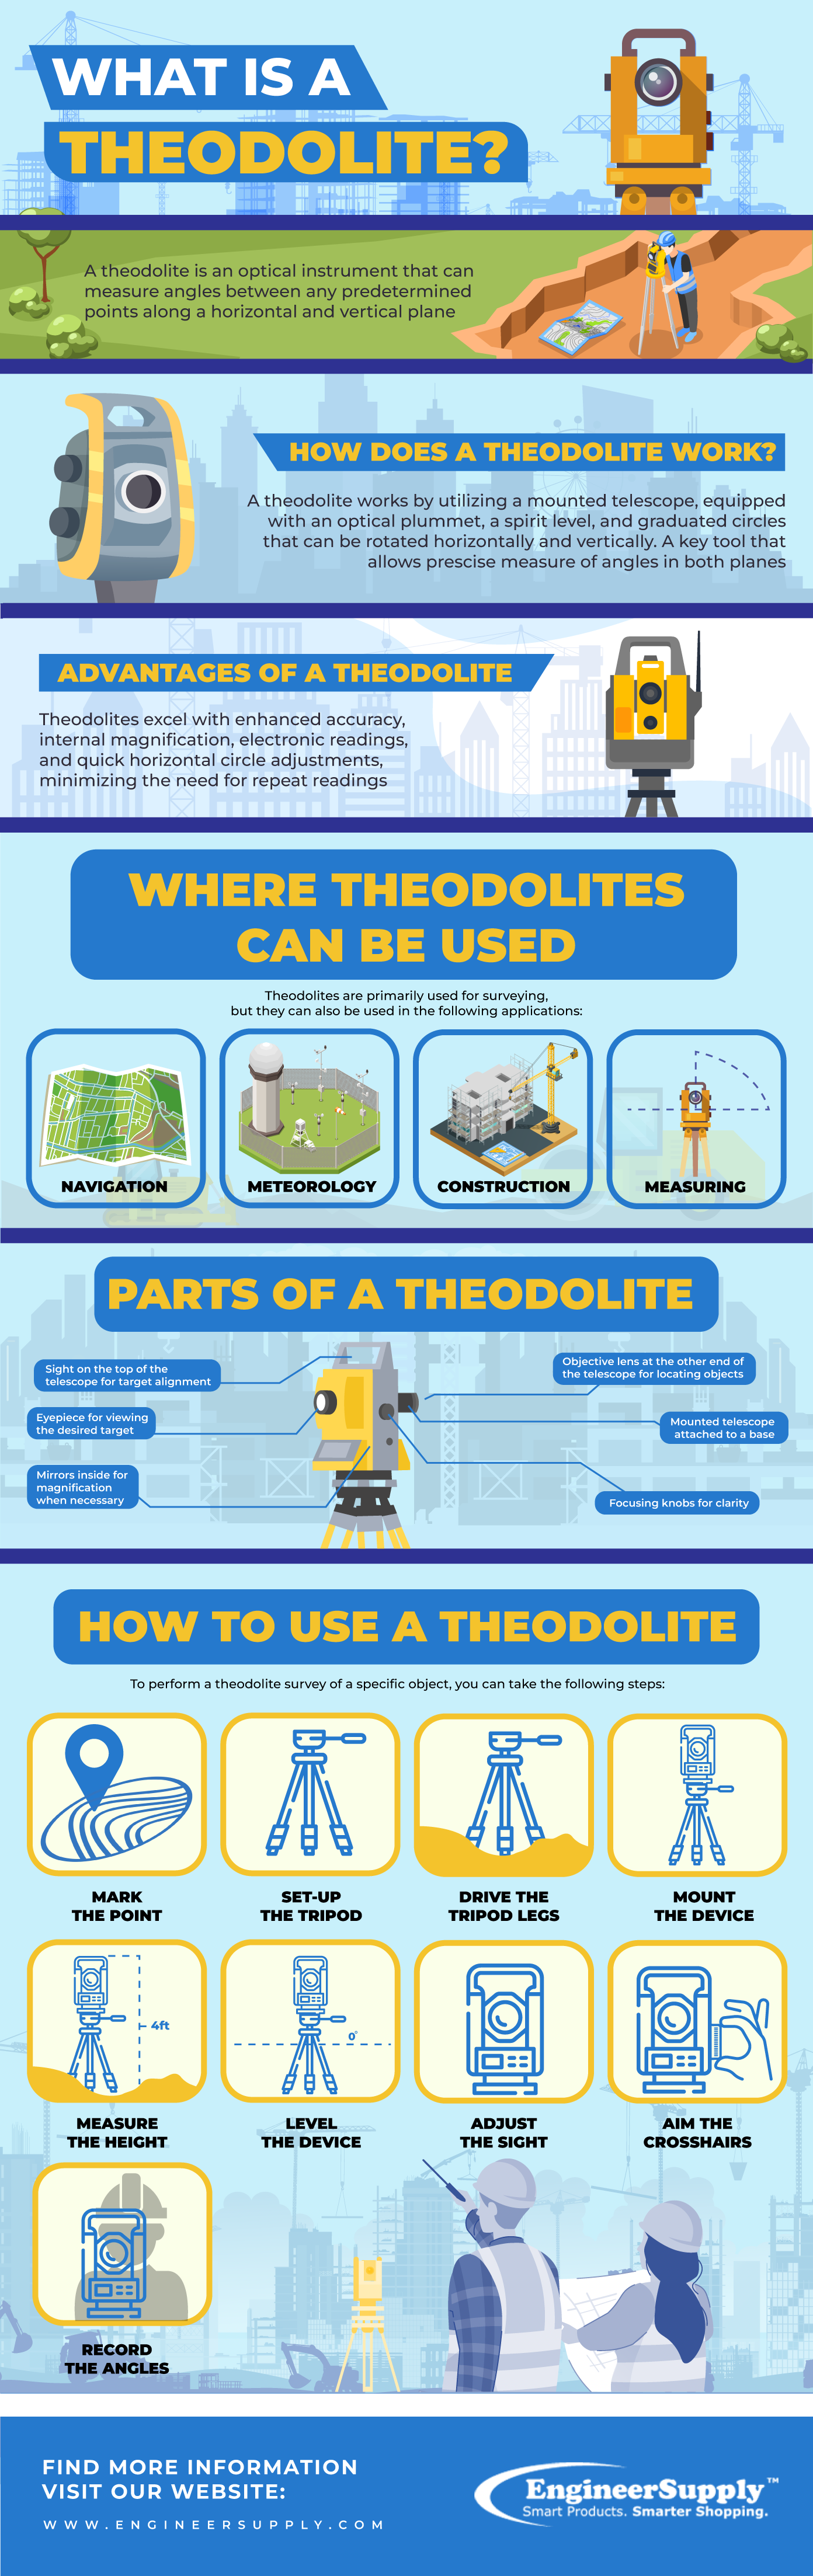 What Is a Theodolite?